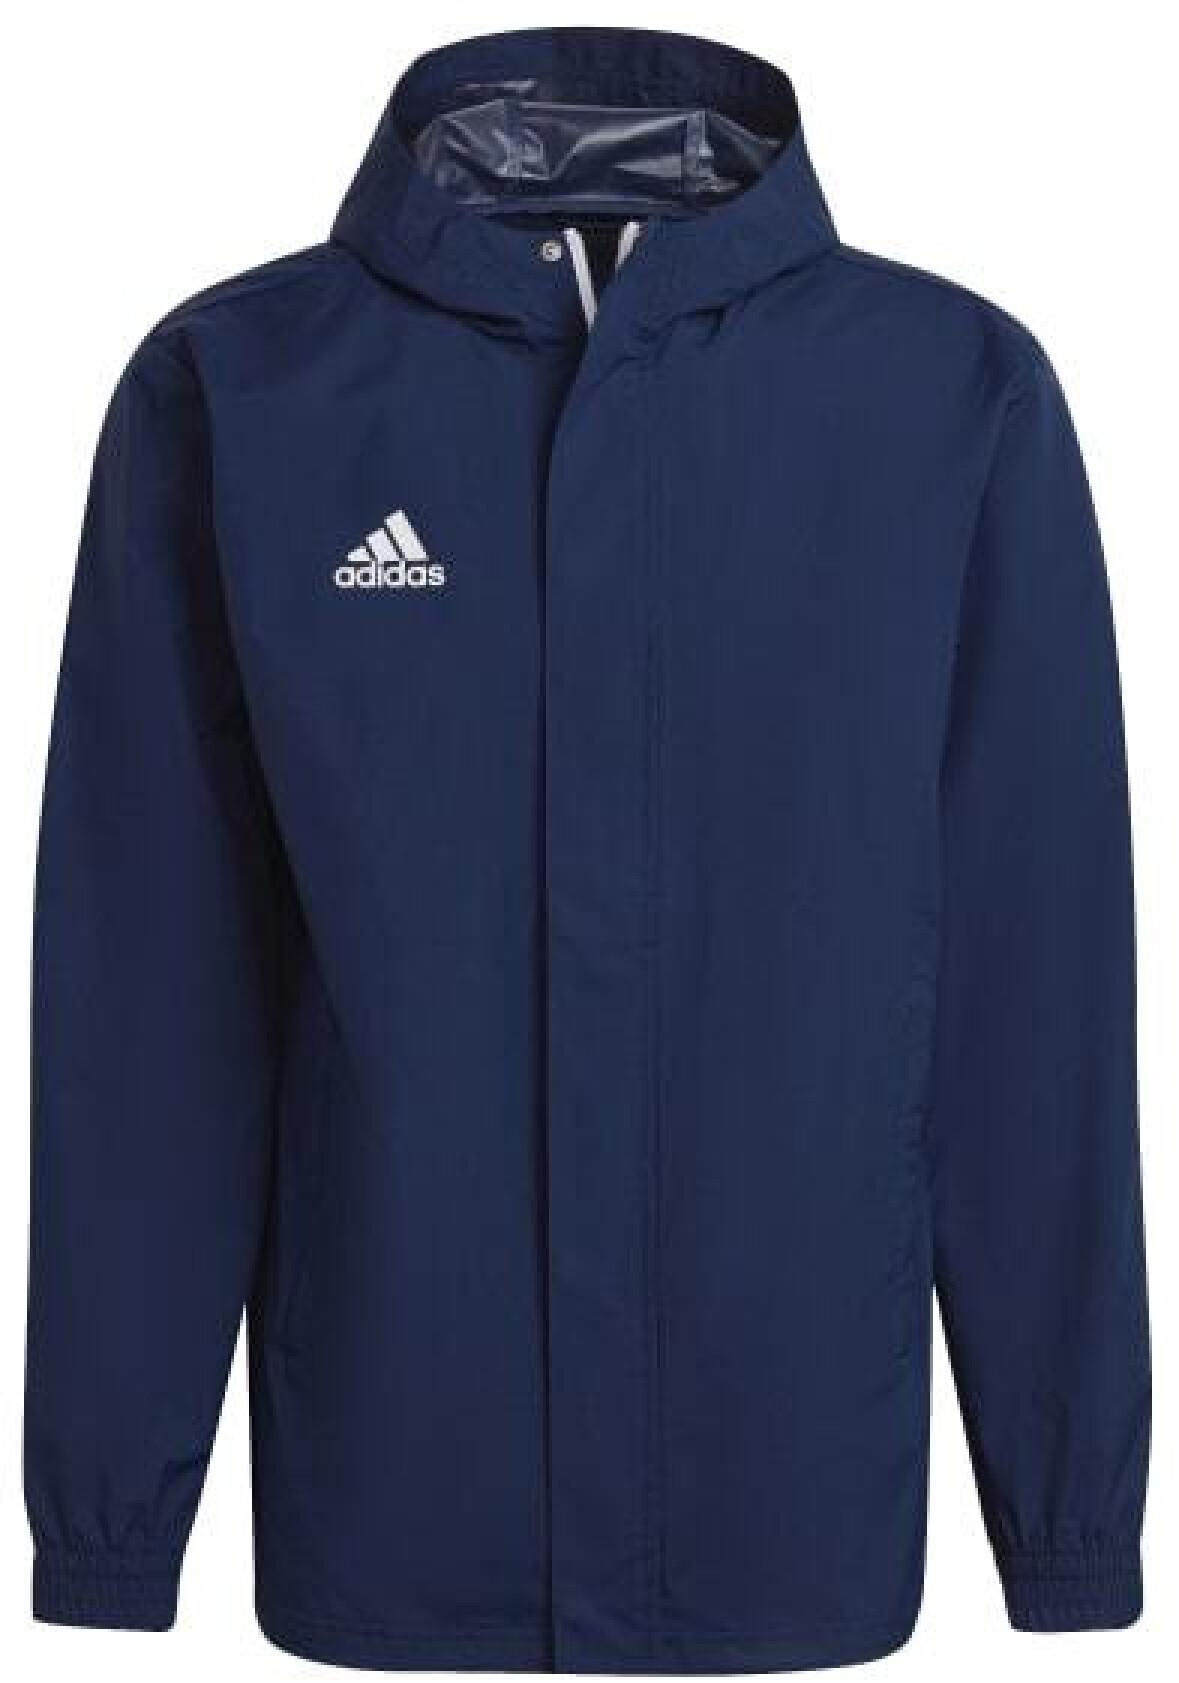 Hoodie adidas ENT22 AW JKTY